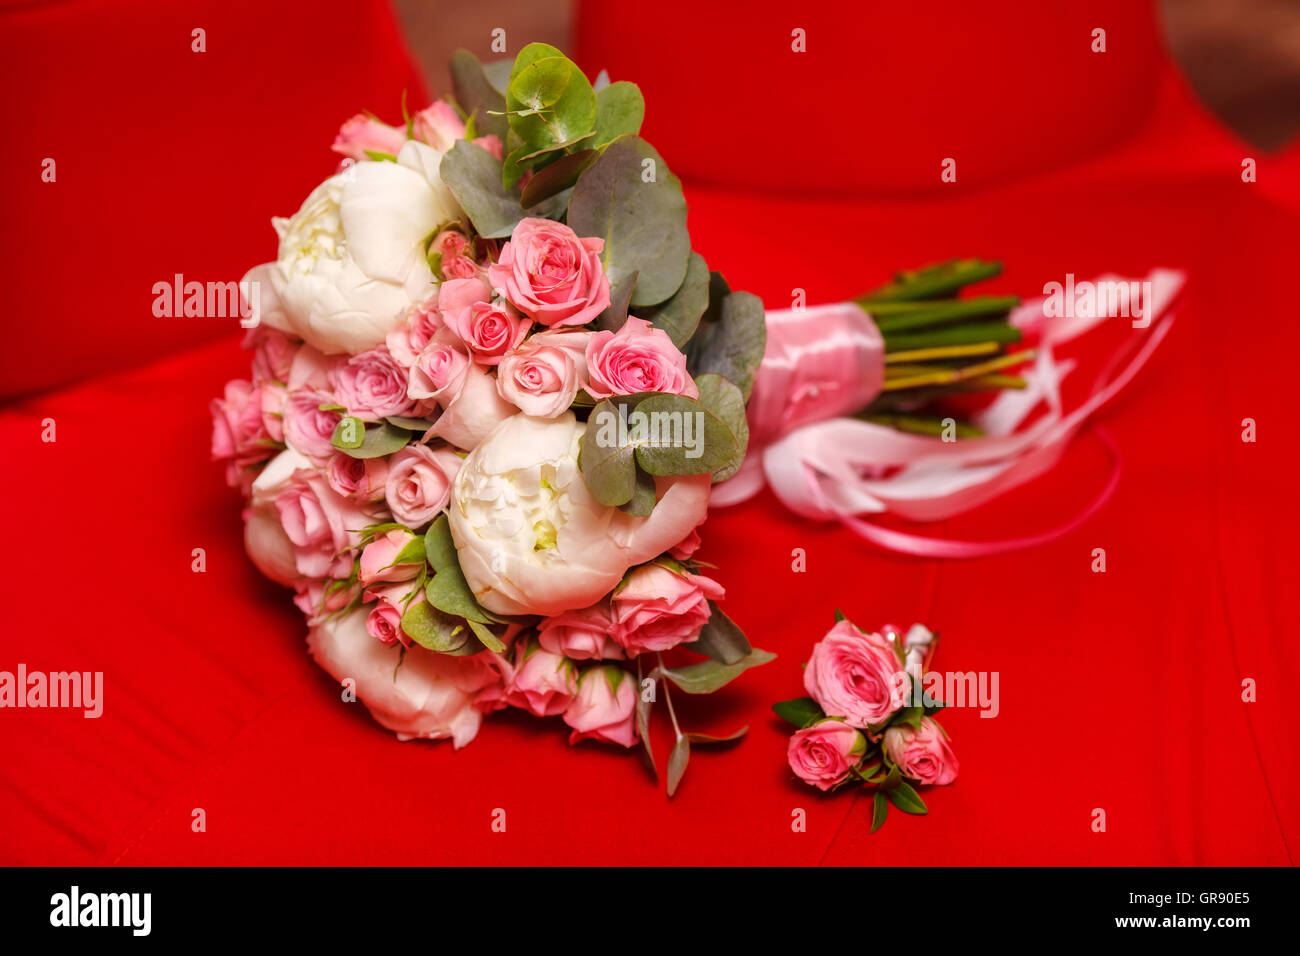 Beautiful peony and rose wedding bouquet, closeup. Marriage concept Stock Photo